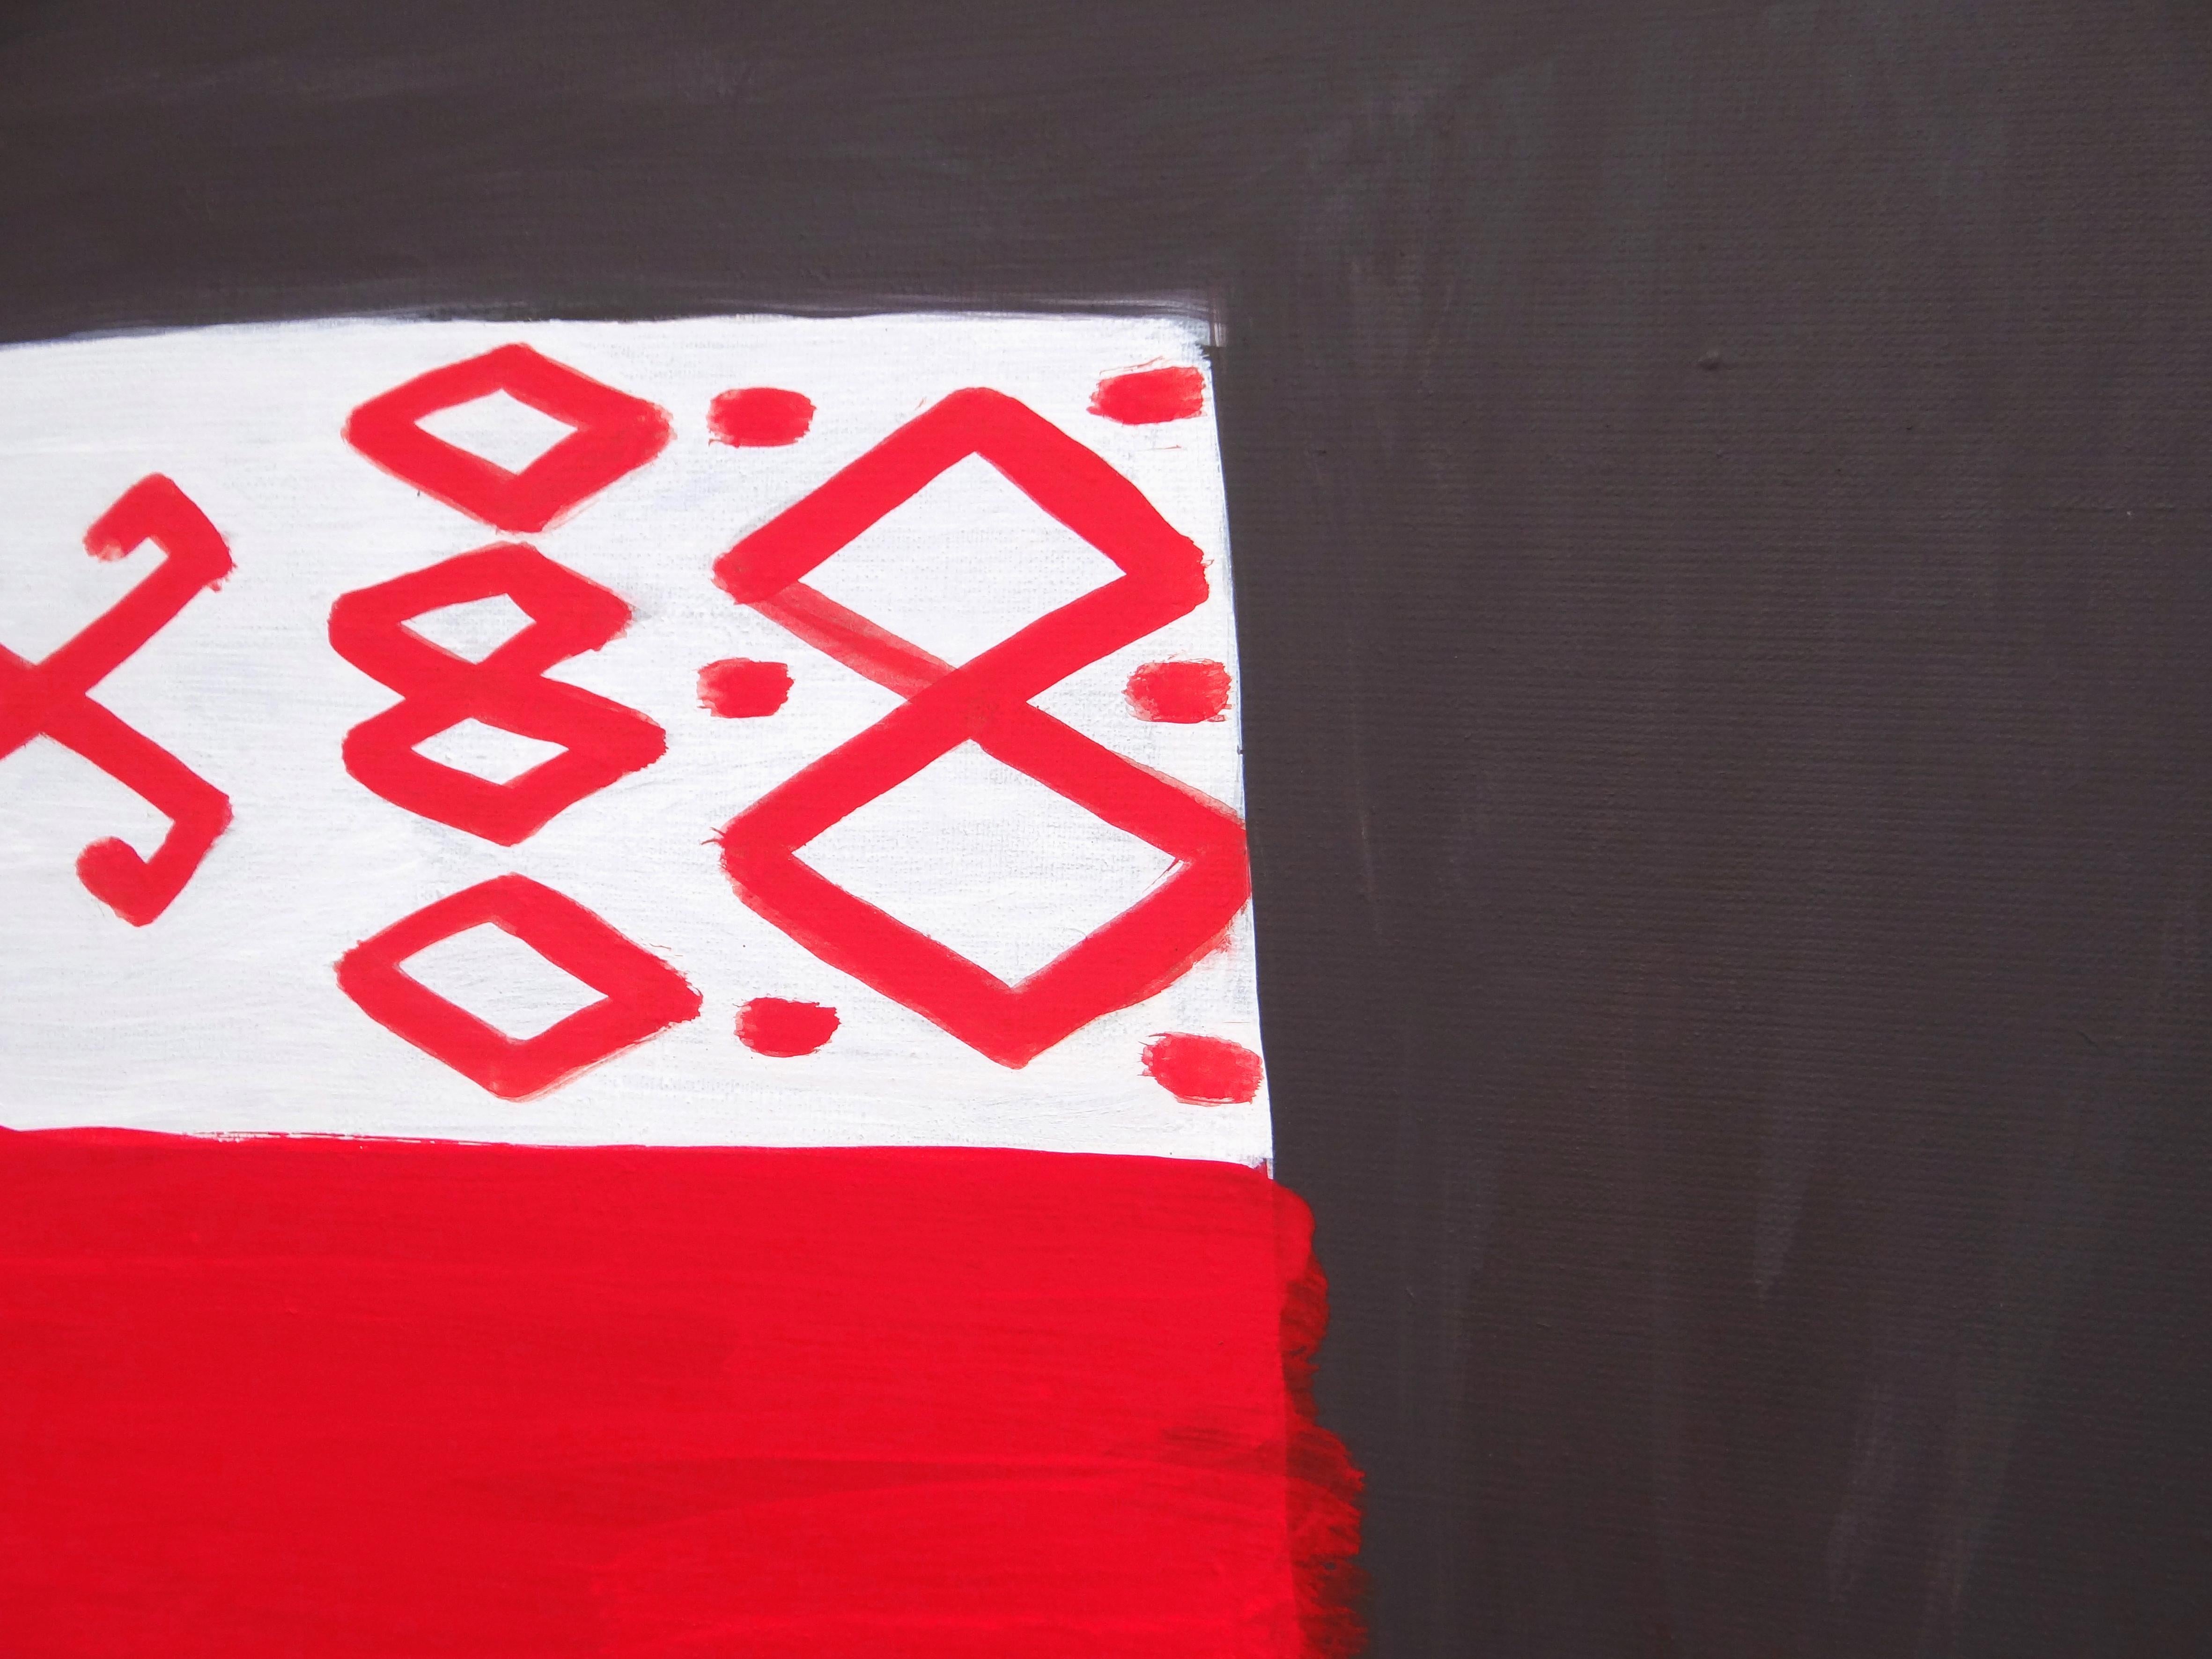 Closing  - Modern Expressive Minimalistic Painting, Large Format For Sale 2